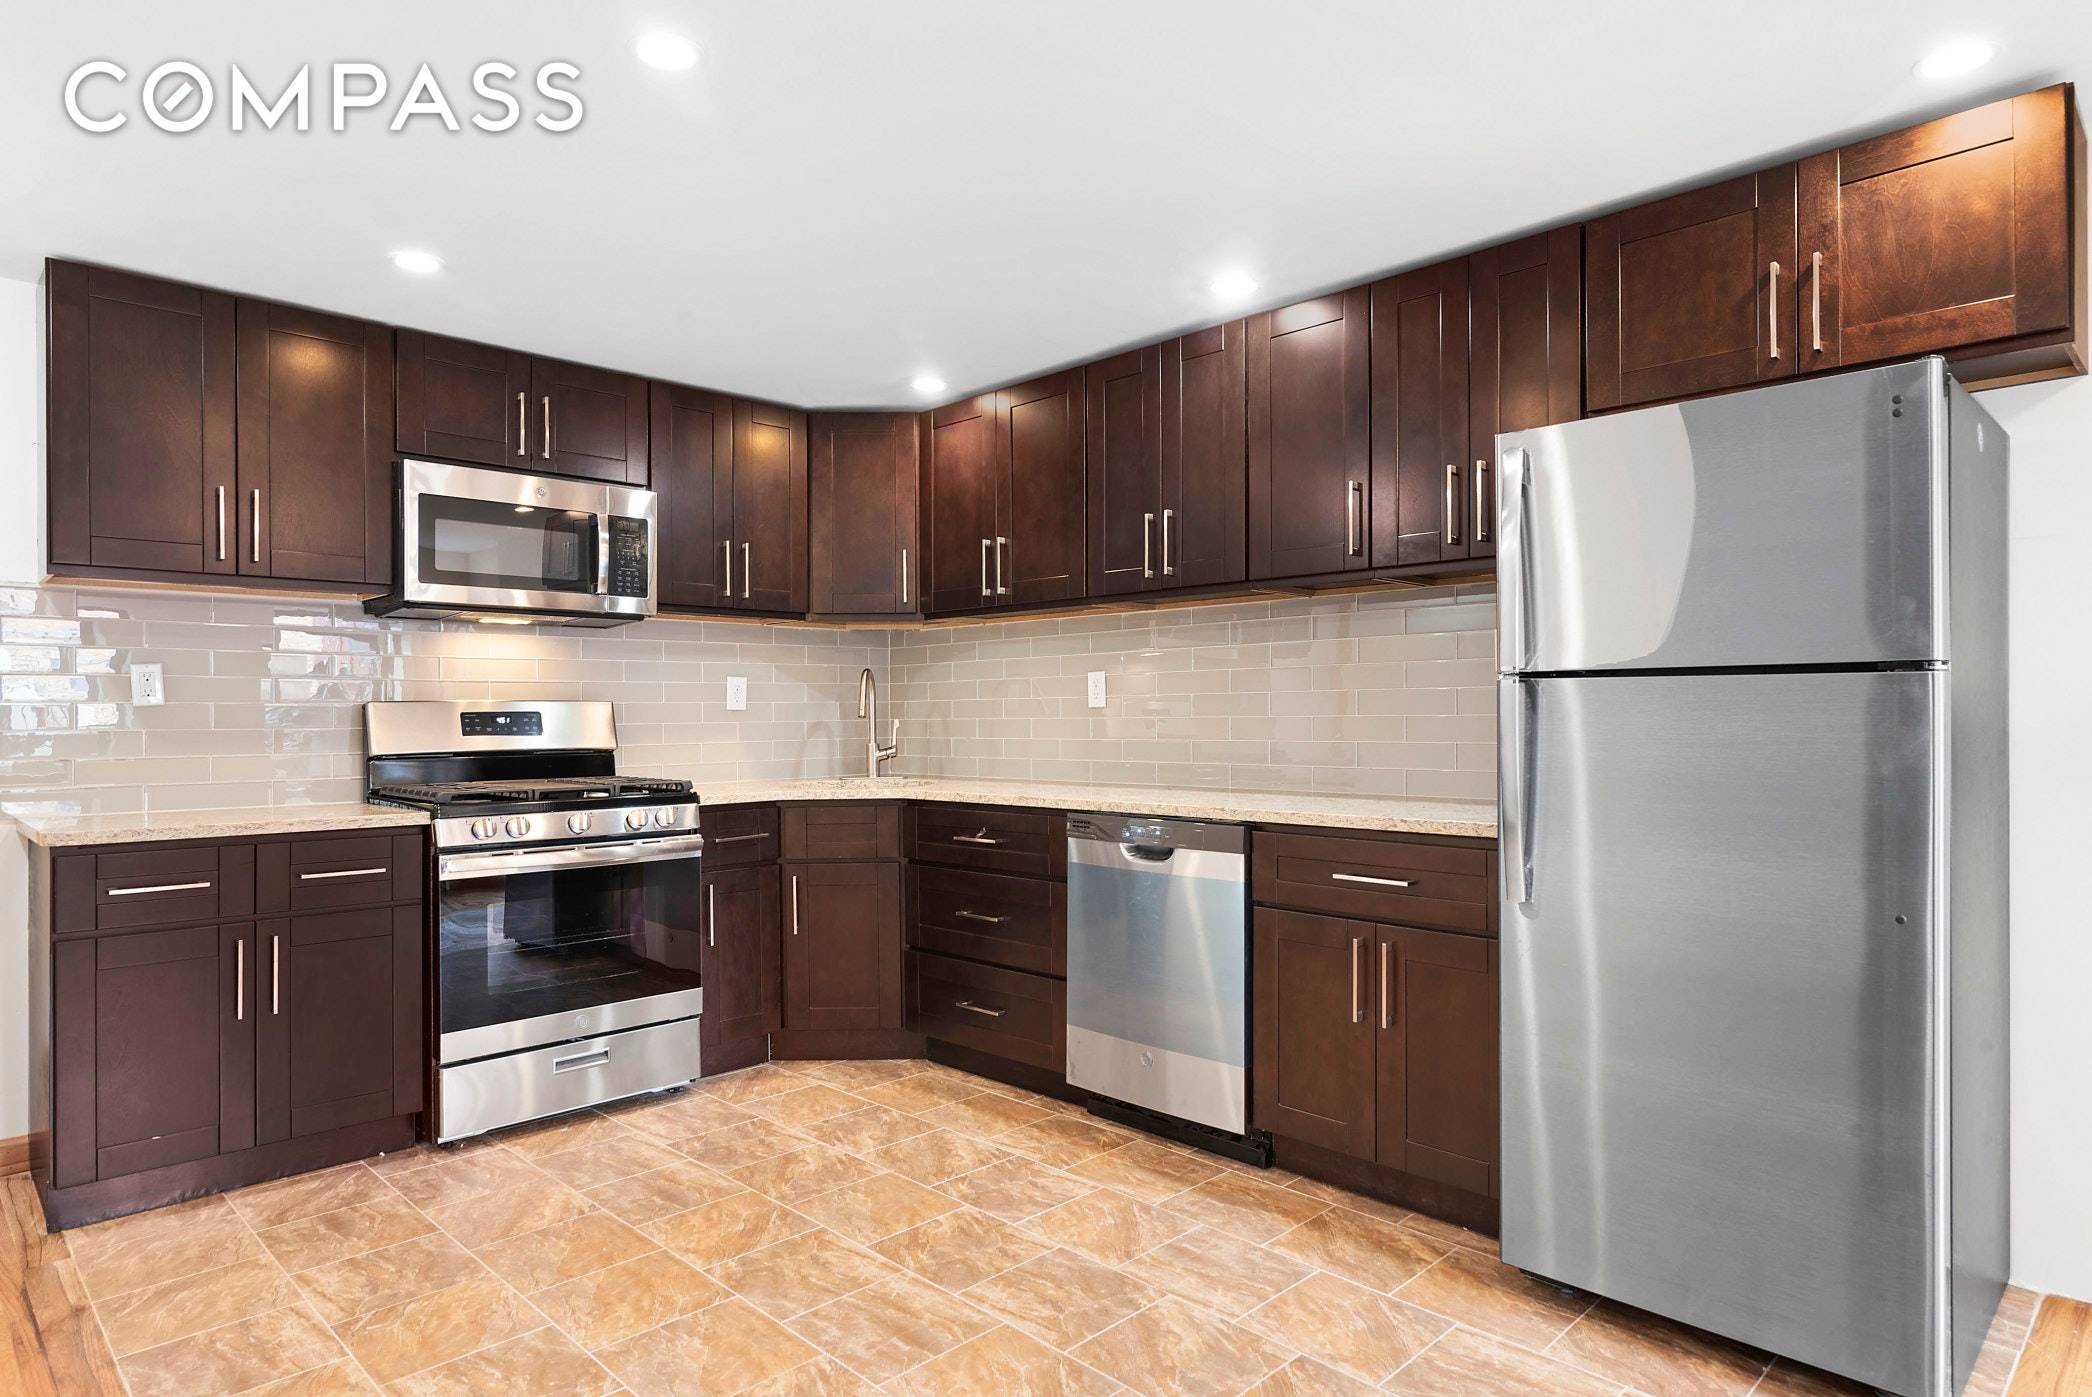 ImPECcably renovated 4 bed 2 bath duplex with private backyard.